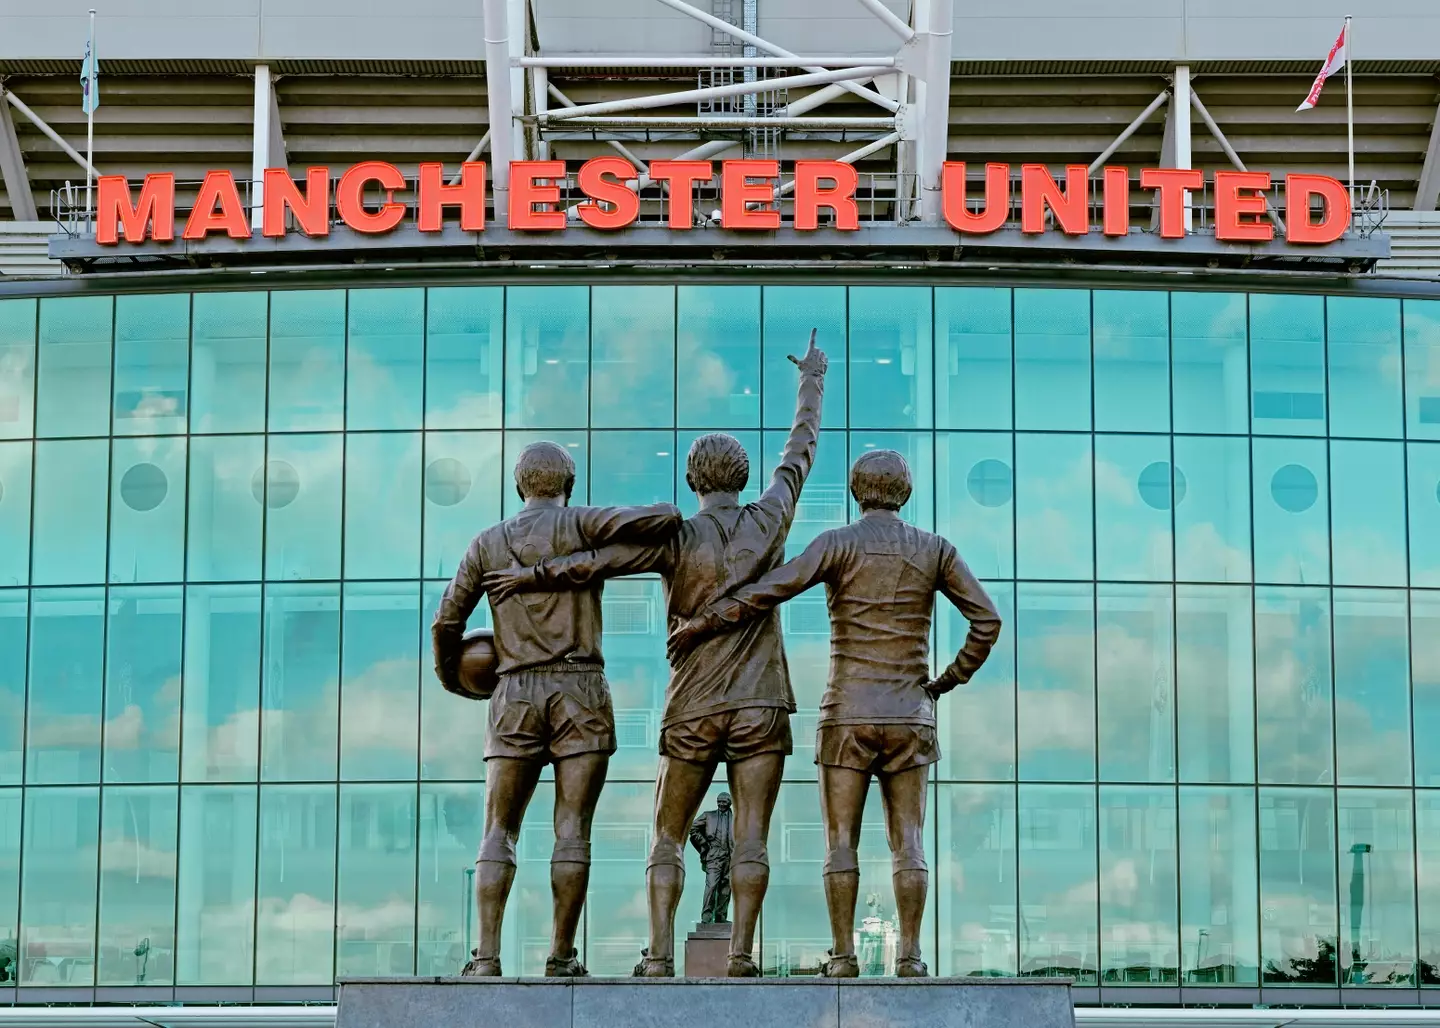 Old Trafford has been United's home since 1910 (Image: PA)